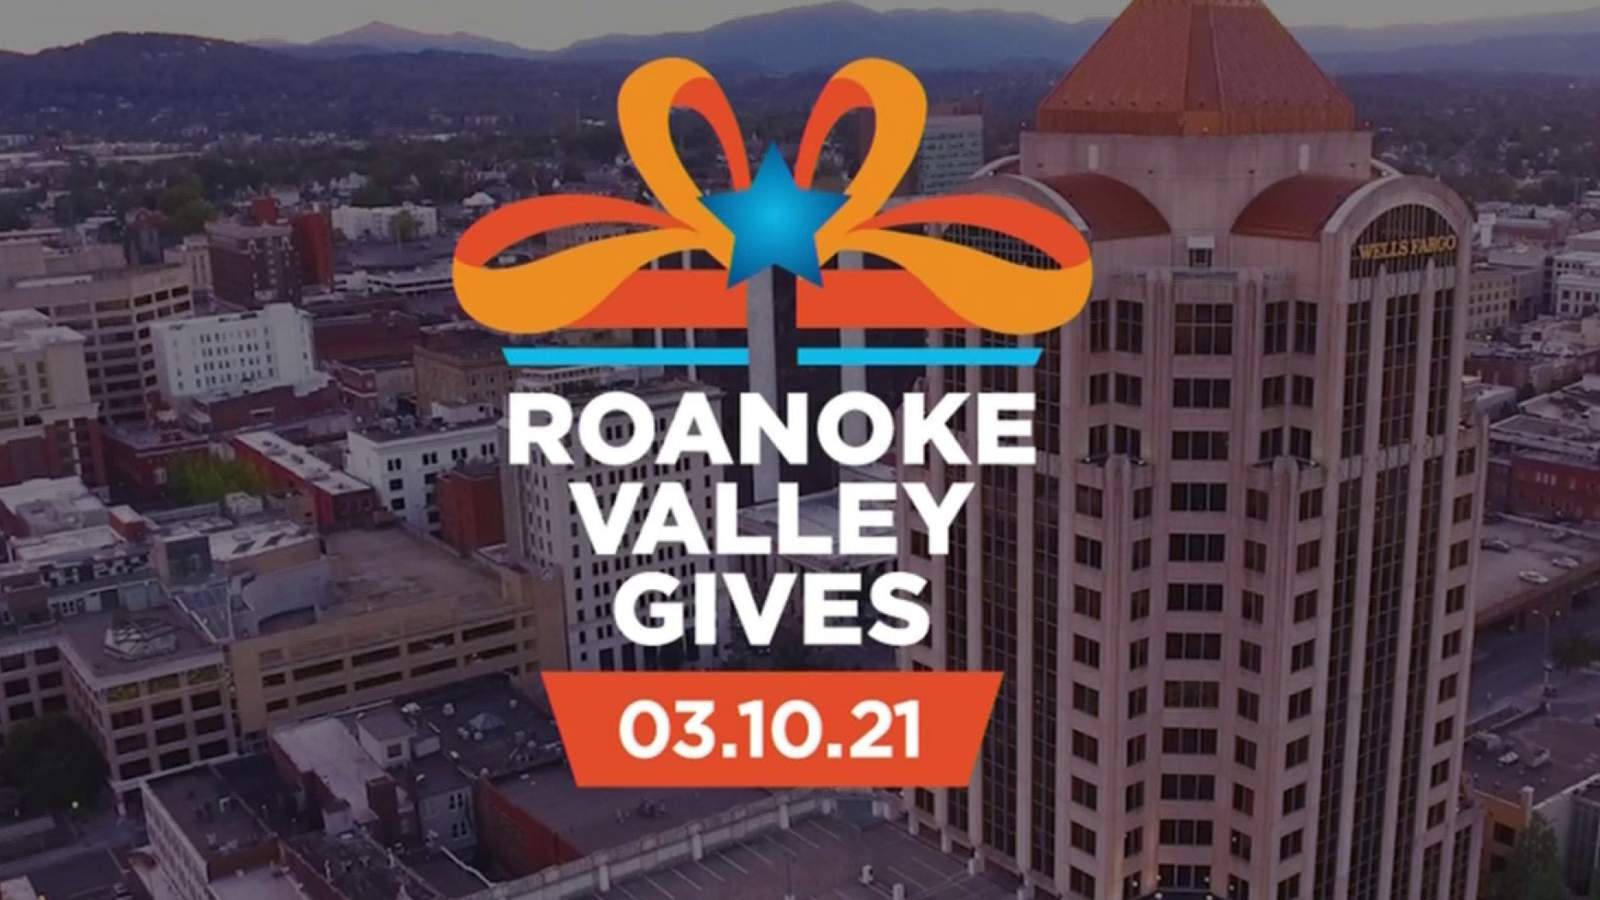 Make sure to support your favorite nonprofits across the Roanoke Valley!